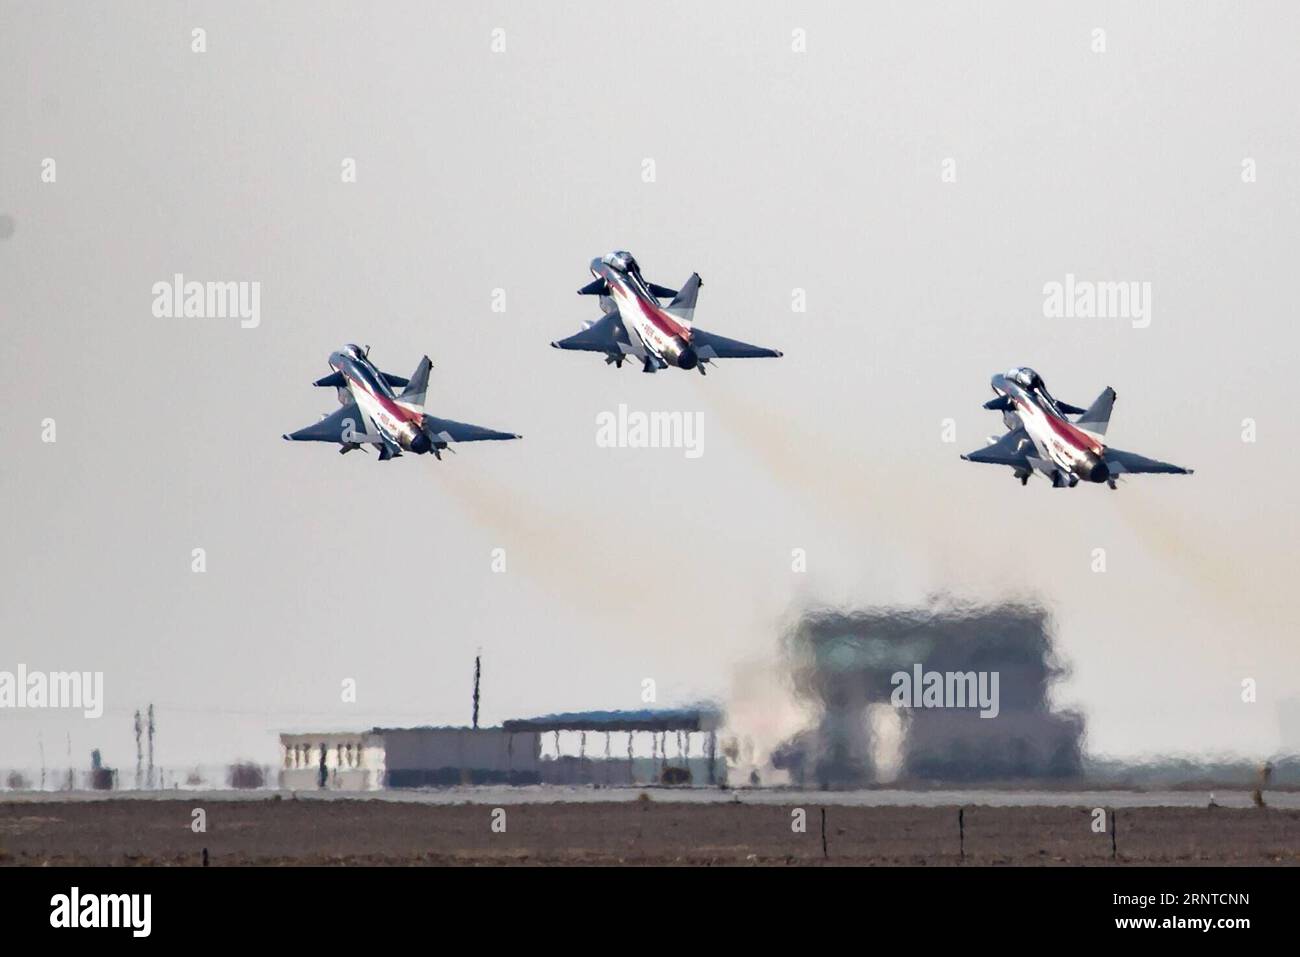 (171106) -- URUMQI, Nov. 6, 2017 -- Photo taken on Nov. 5, 2017 shows J-10 aerobatic fighter jets of the Chinese Air Force s August 1st Air Demonstration Team in China. The Chinese Air Force s August 1st Air Demonstration Team on Monday left for the United Arab Emirates (UAE) to take part in the Dubai Airshow, which is scheduled to last from Nov. 12-16. The team will also visit Pakistan after the airshow and stage aerobatic performances there on Nov. 20, according to the Chinese People s Liberation Army Air Force. )(mcg) CHINA-PLA-AIR DEMONSTRATION TEAM (CN*) Yangxpan PUBLICATIONxNOTxINxCHN Stock Photo